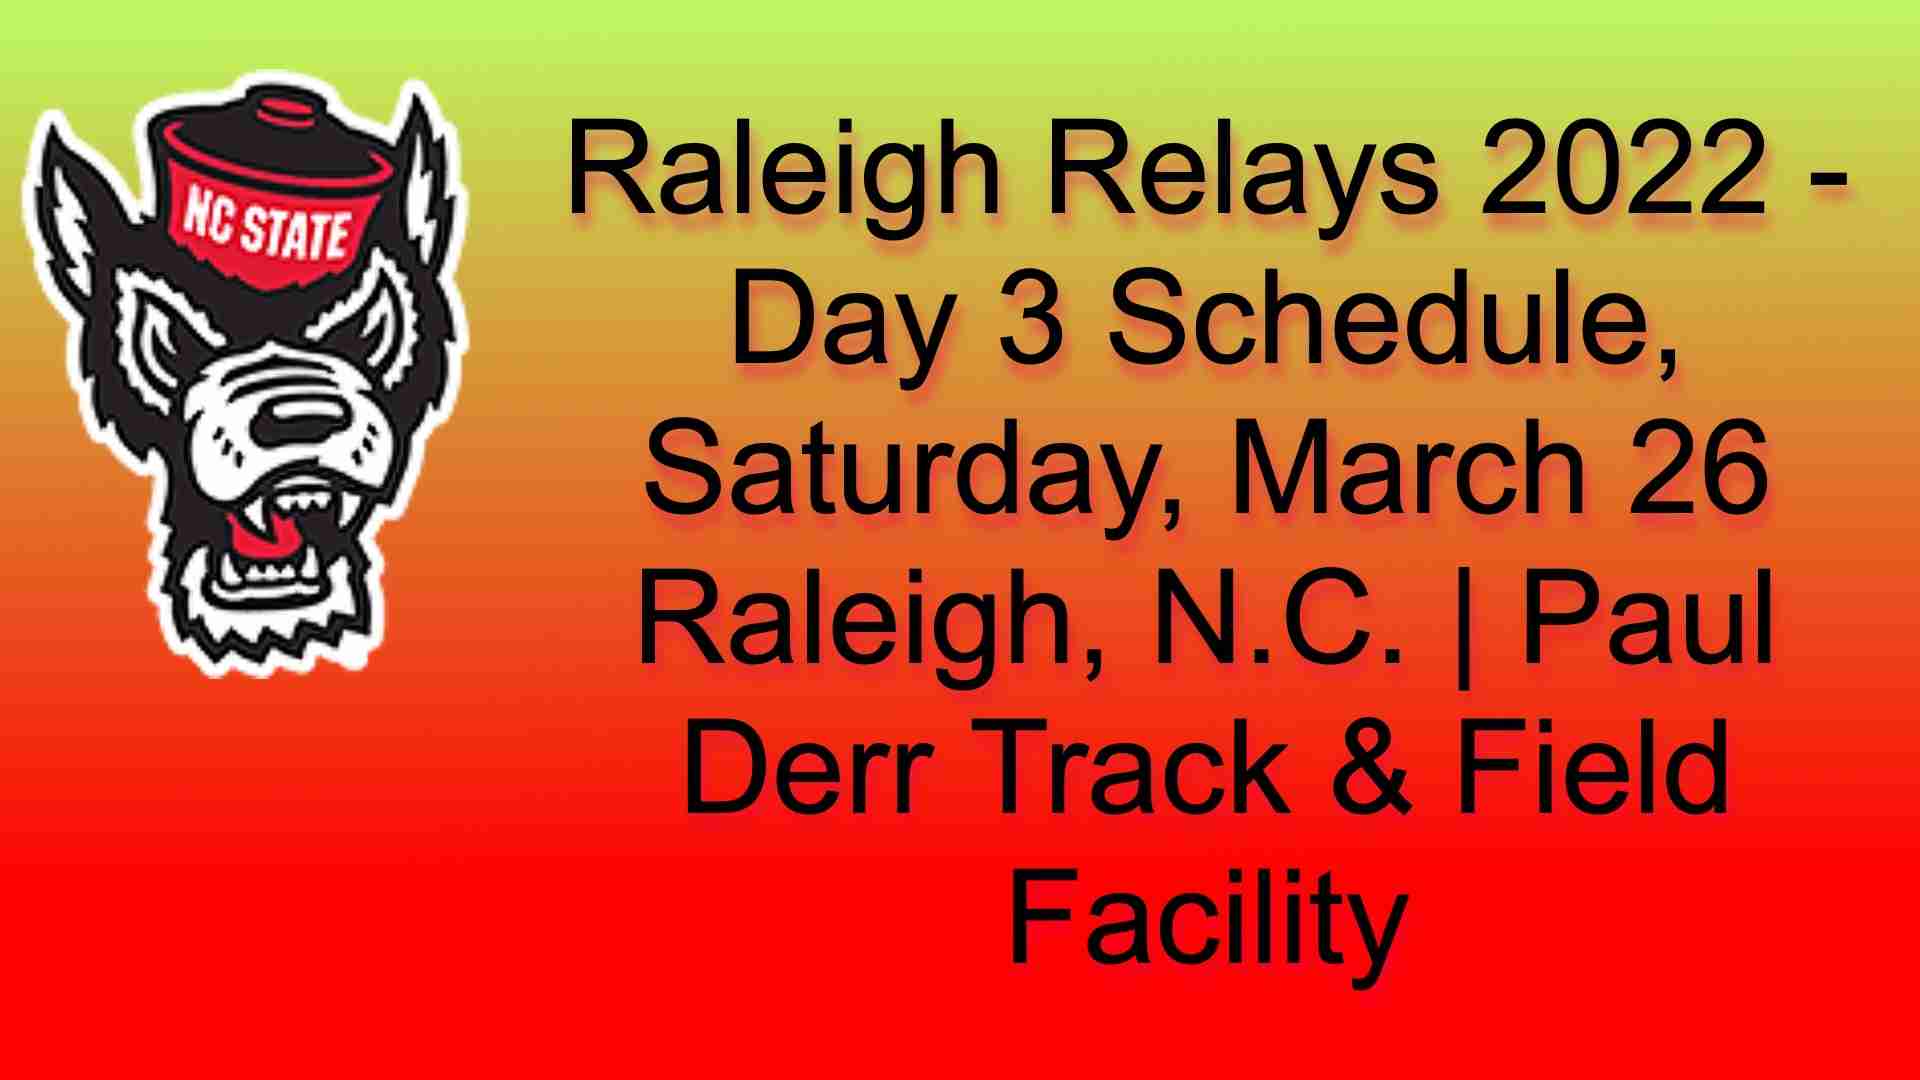 You-can-watch-the-Raleigh-Relays-2022-day-3-order-of-events-live-results